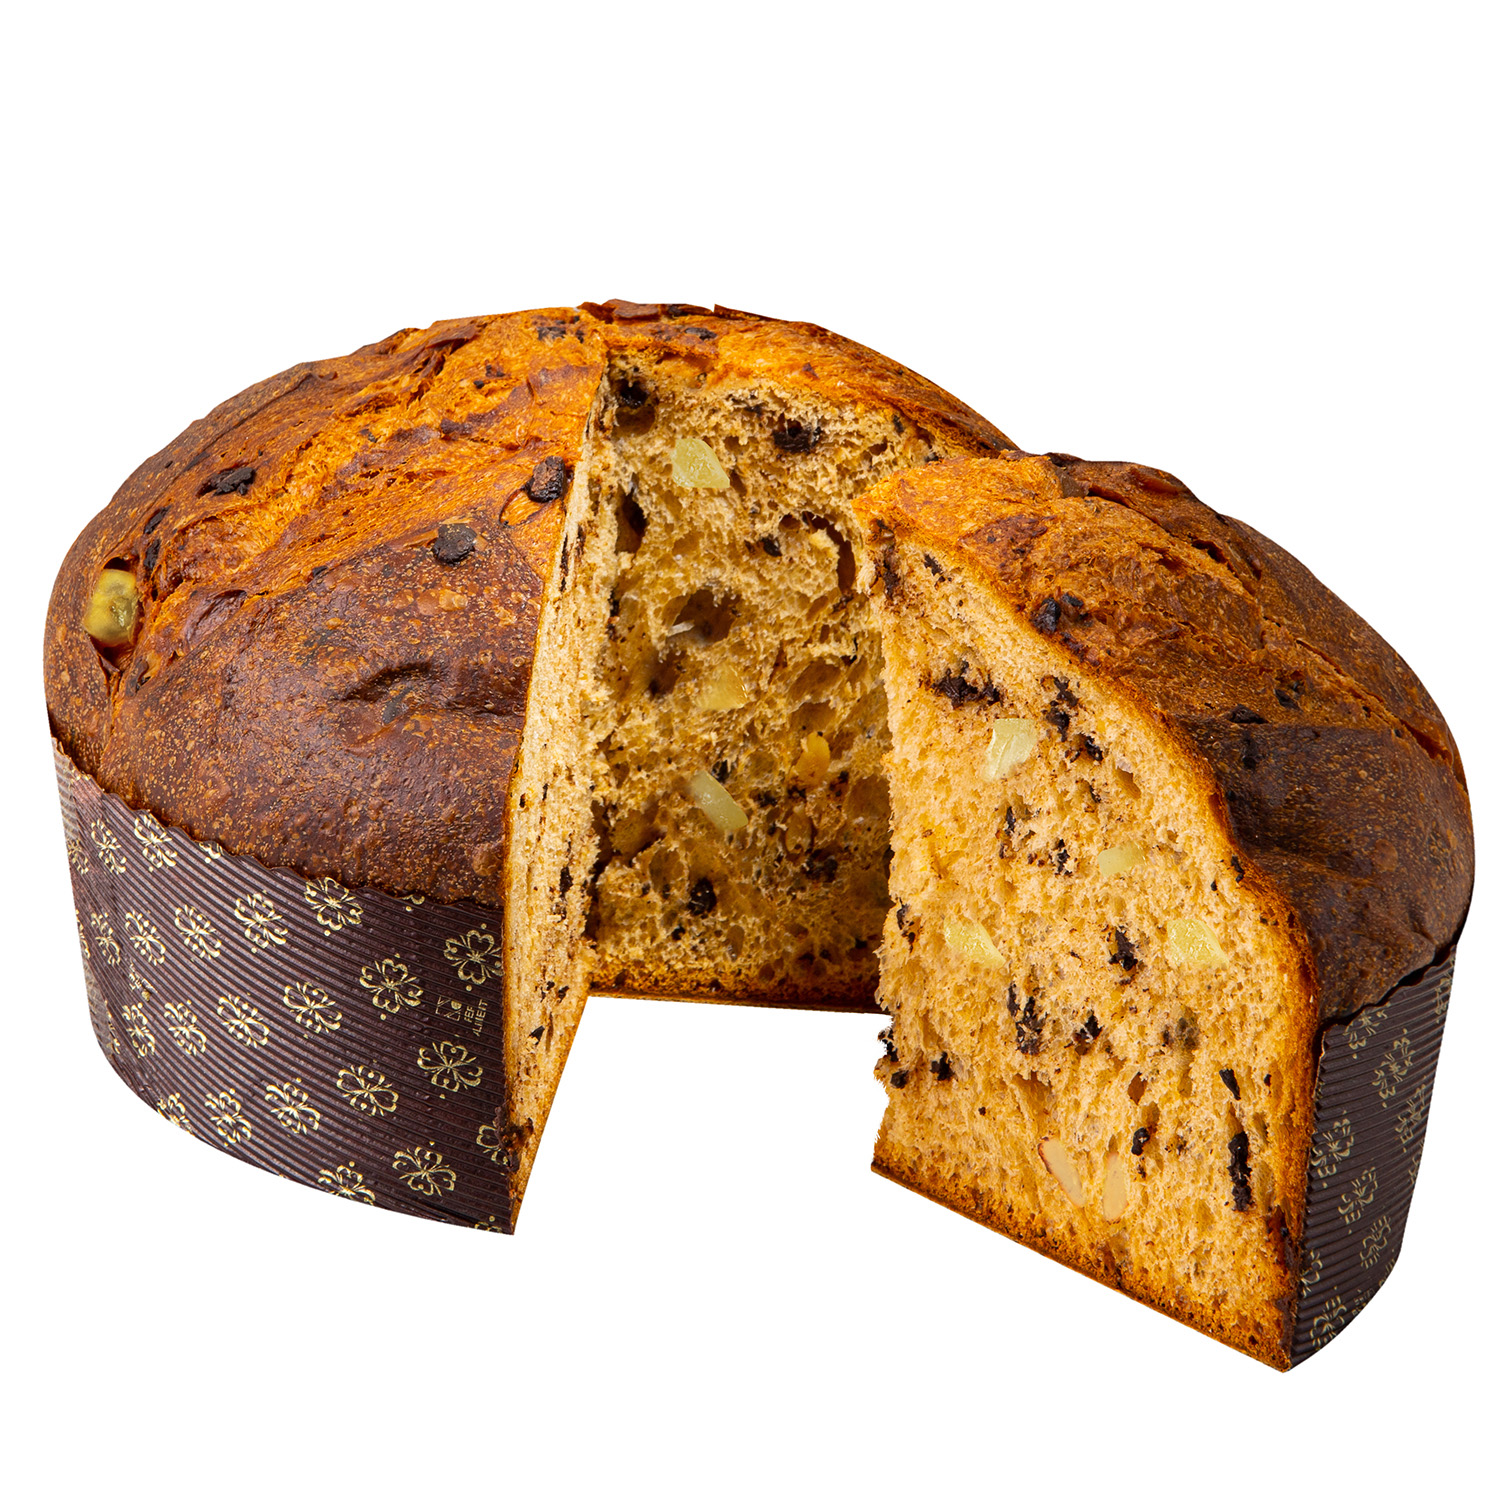 Citrus, Ginger and Chocolate Panettone Baked goods